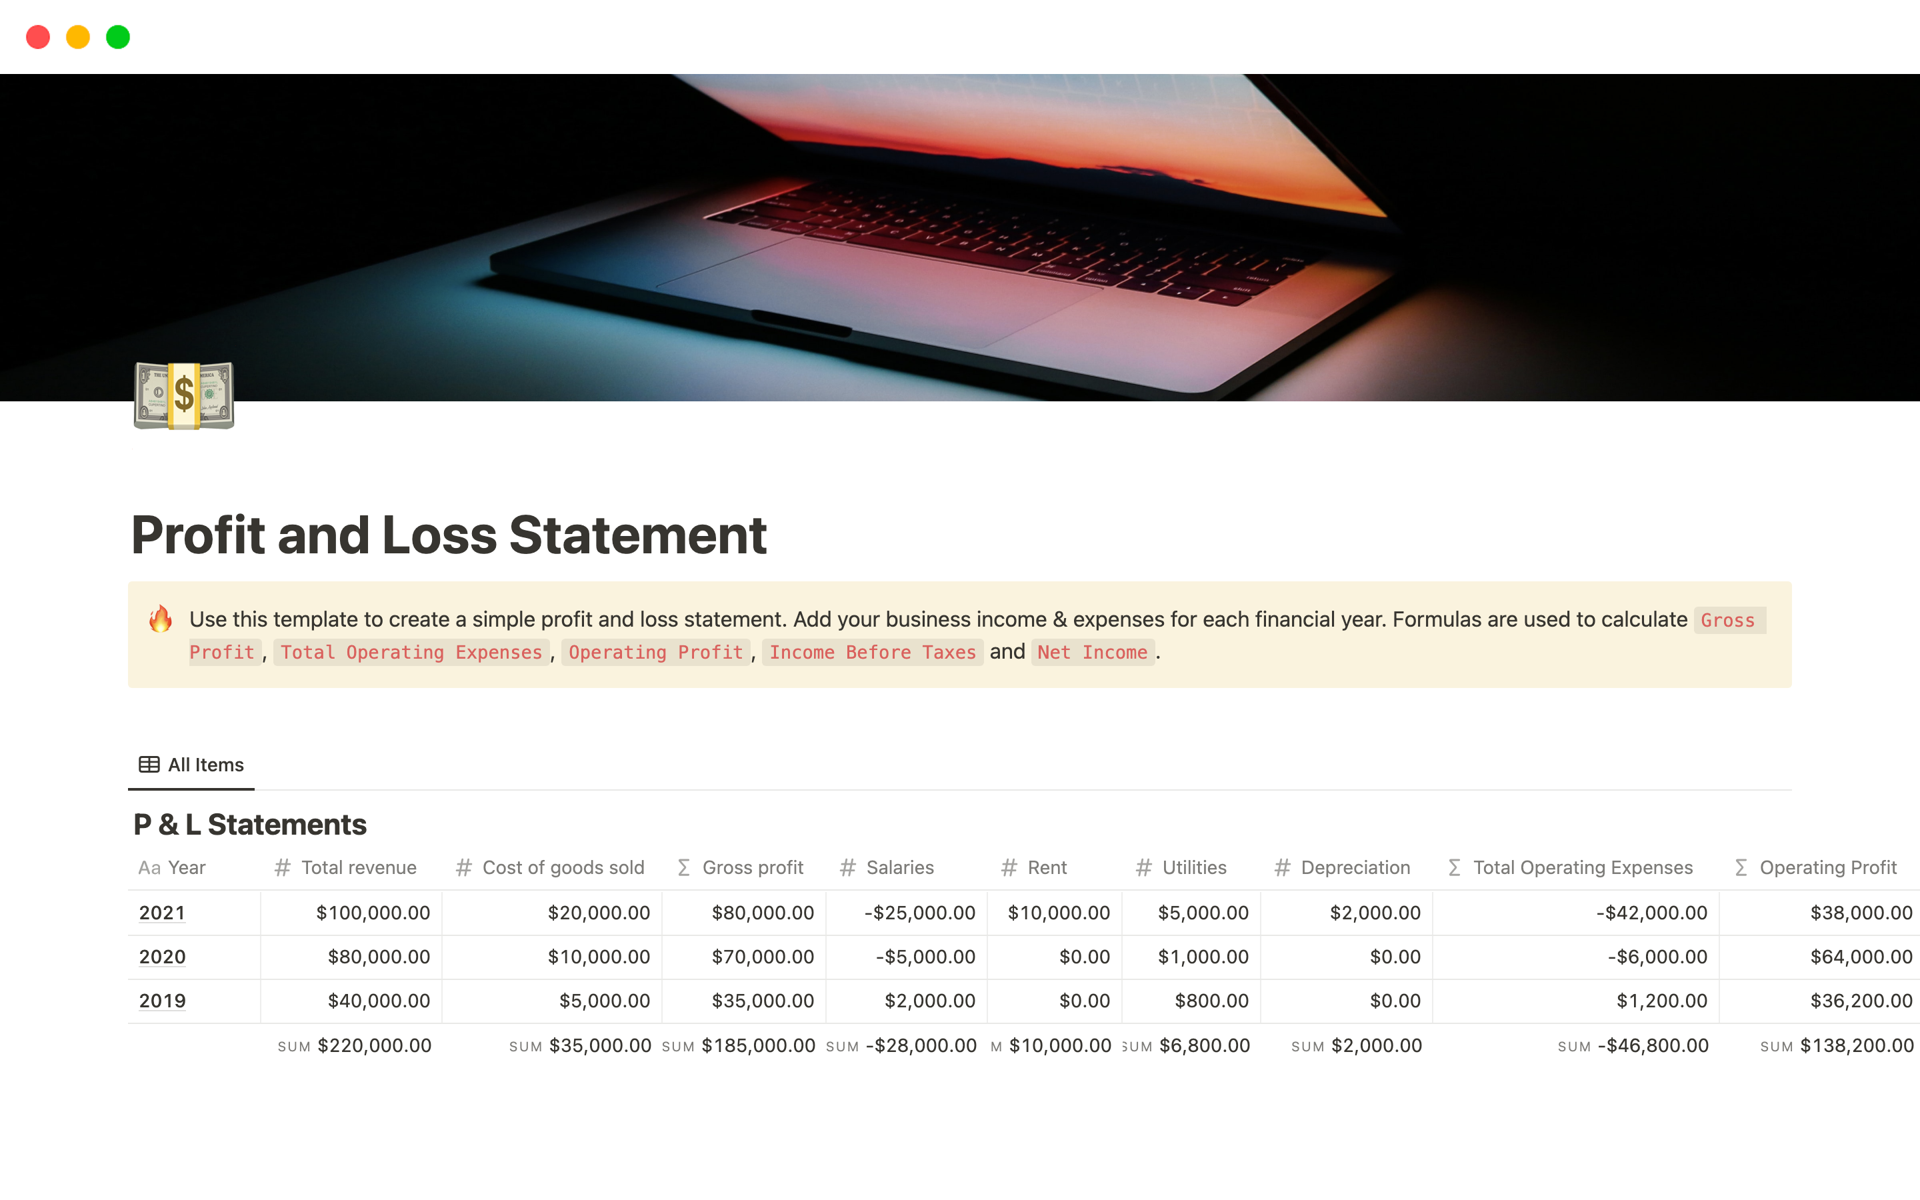 Use this template to create a simple profit and loss statement in Notion.